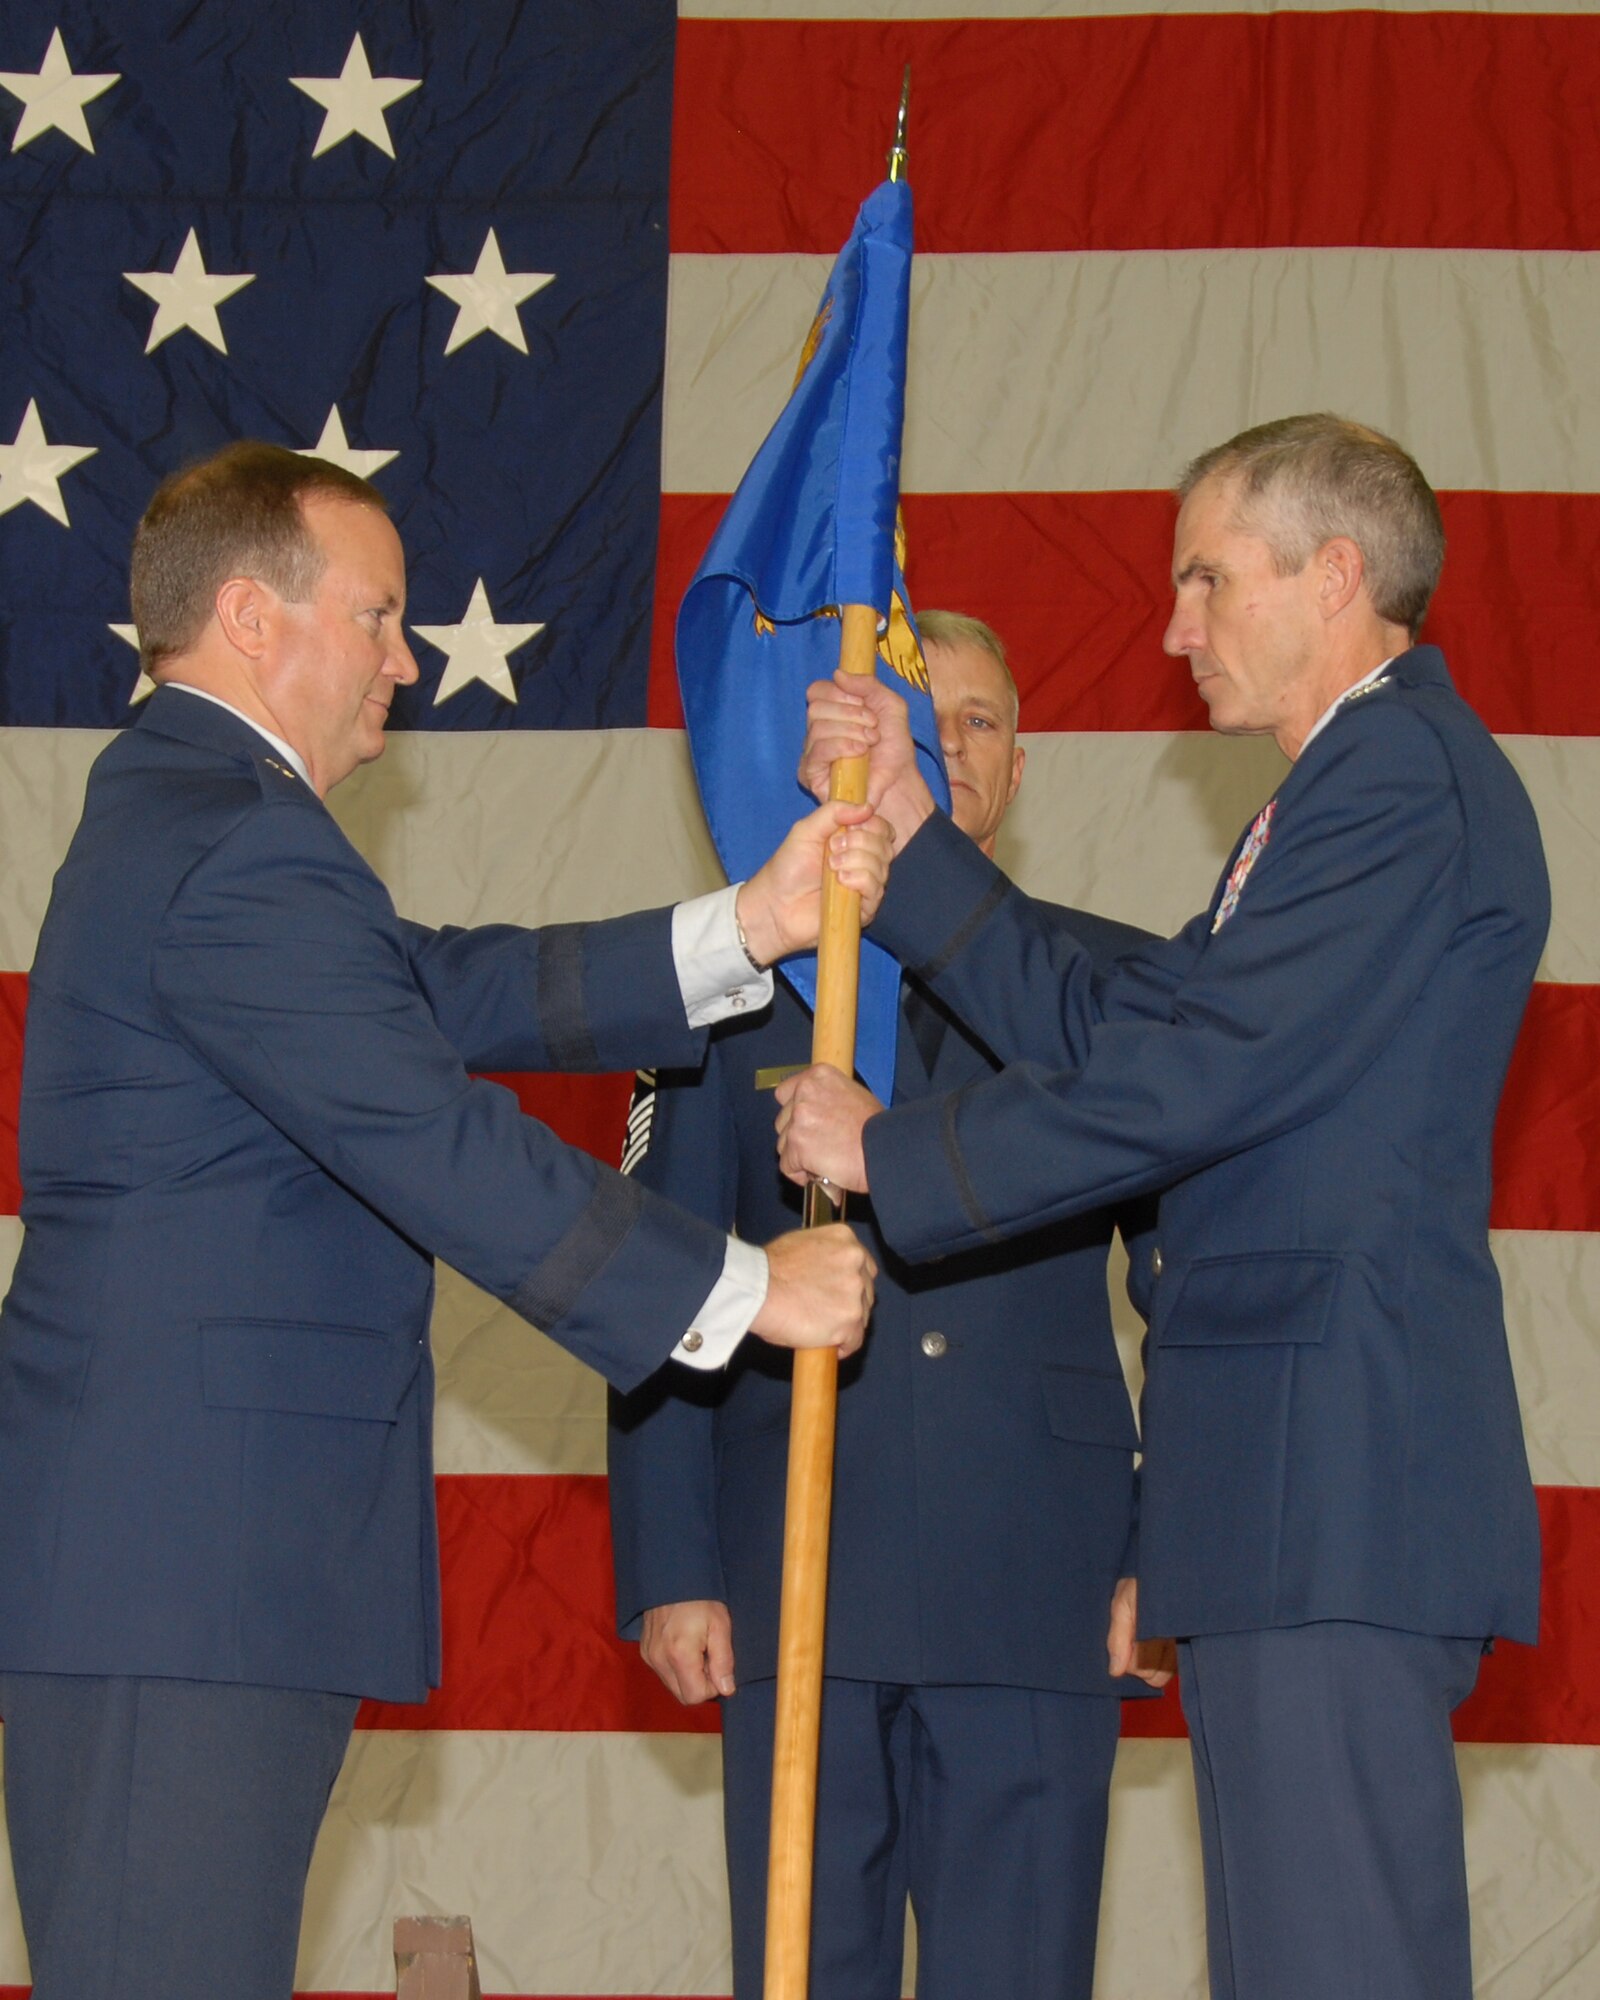 BG Don Haught hands the guidon to incoming Wing Commander Col Dennis Grunstad at the change of command ceremony for the 153d Airlift Wing